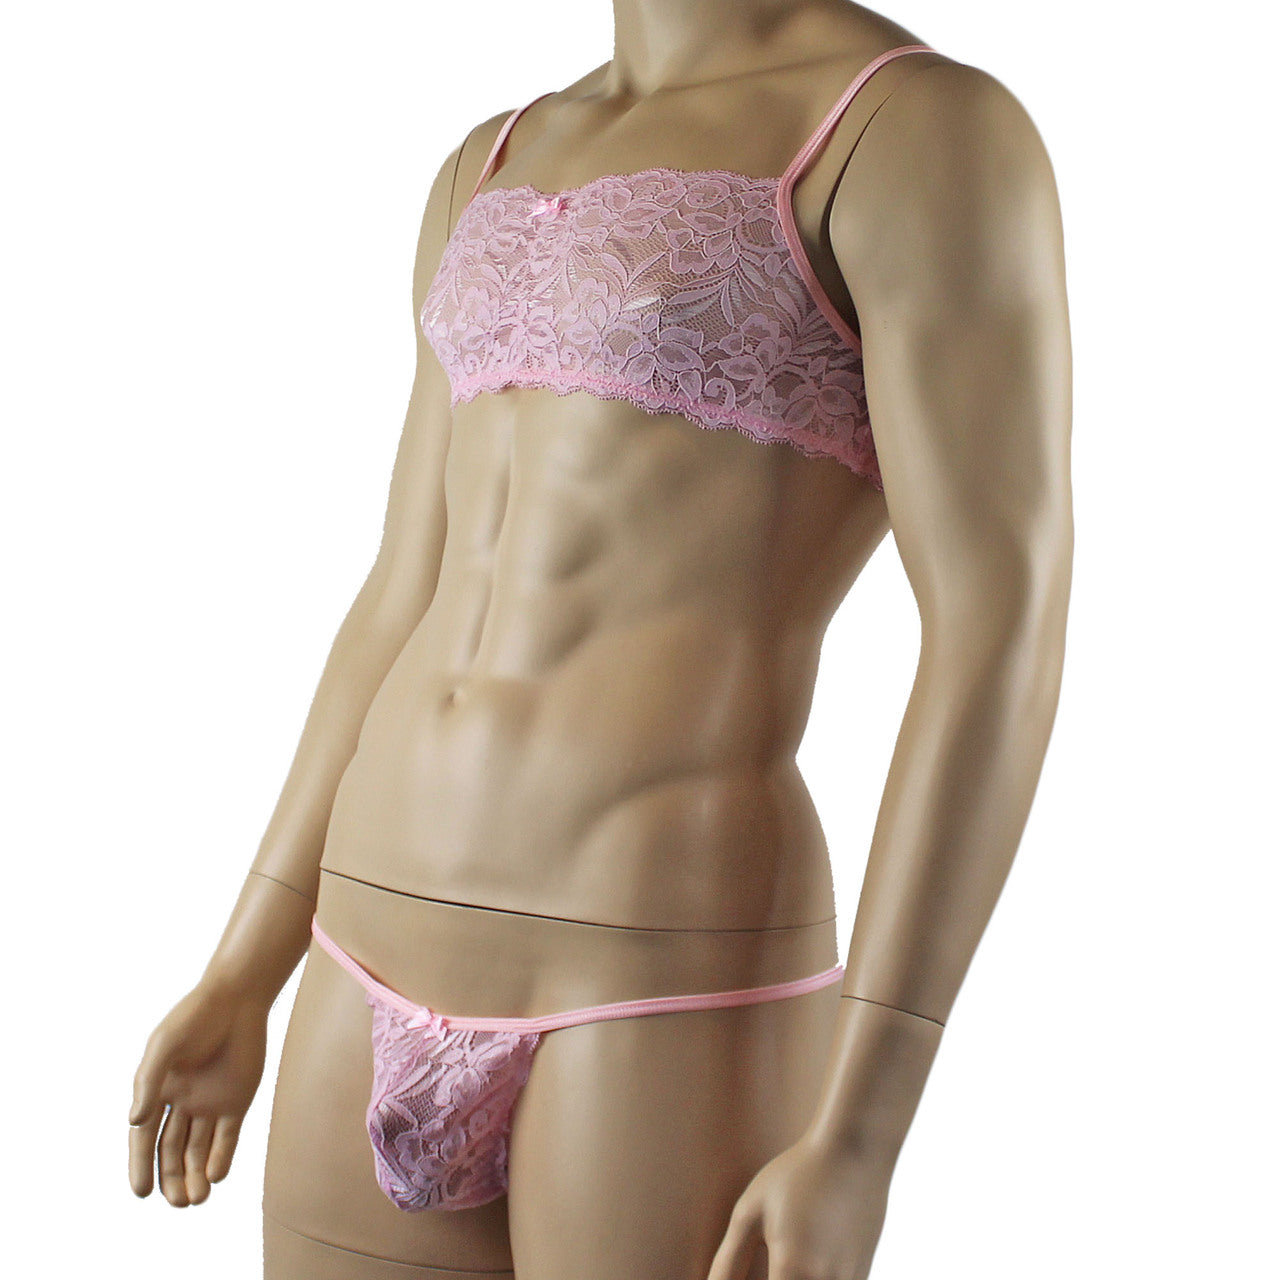 Mens Kristy Lingerie Bra Top and Pouch G string Light Pink